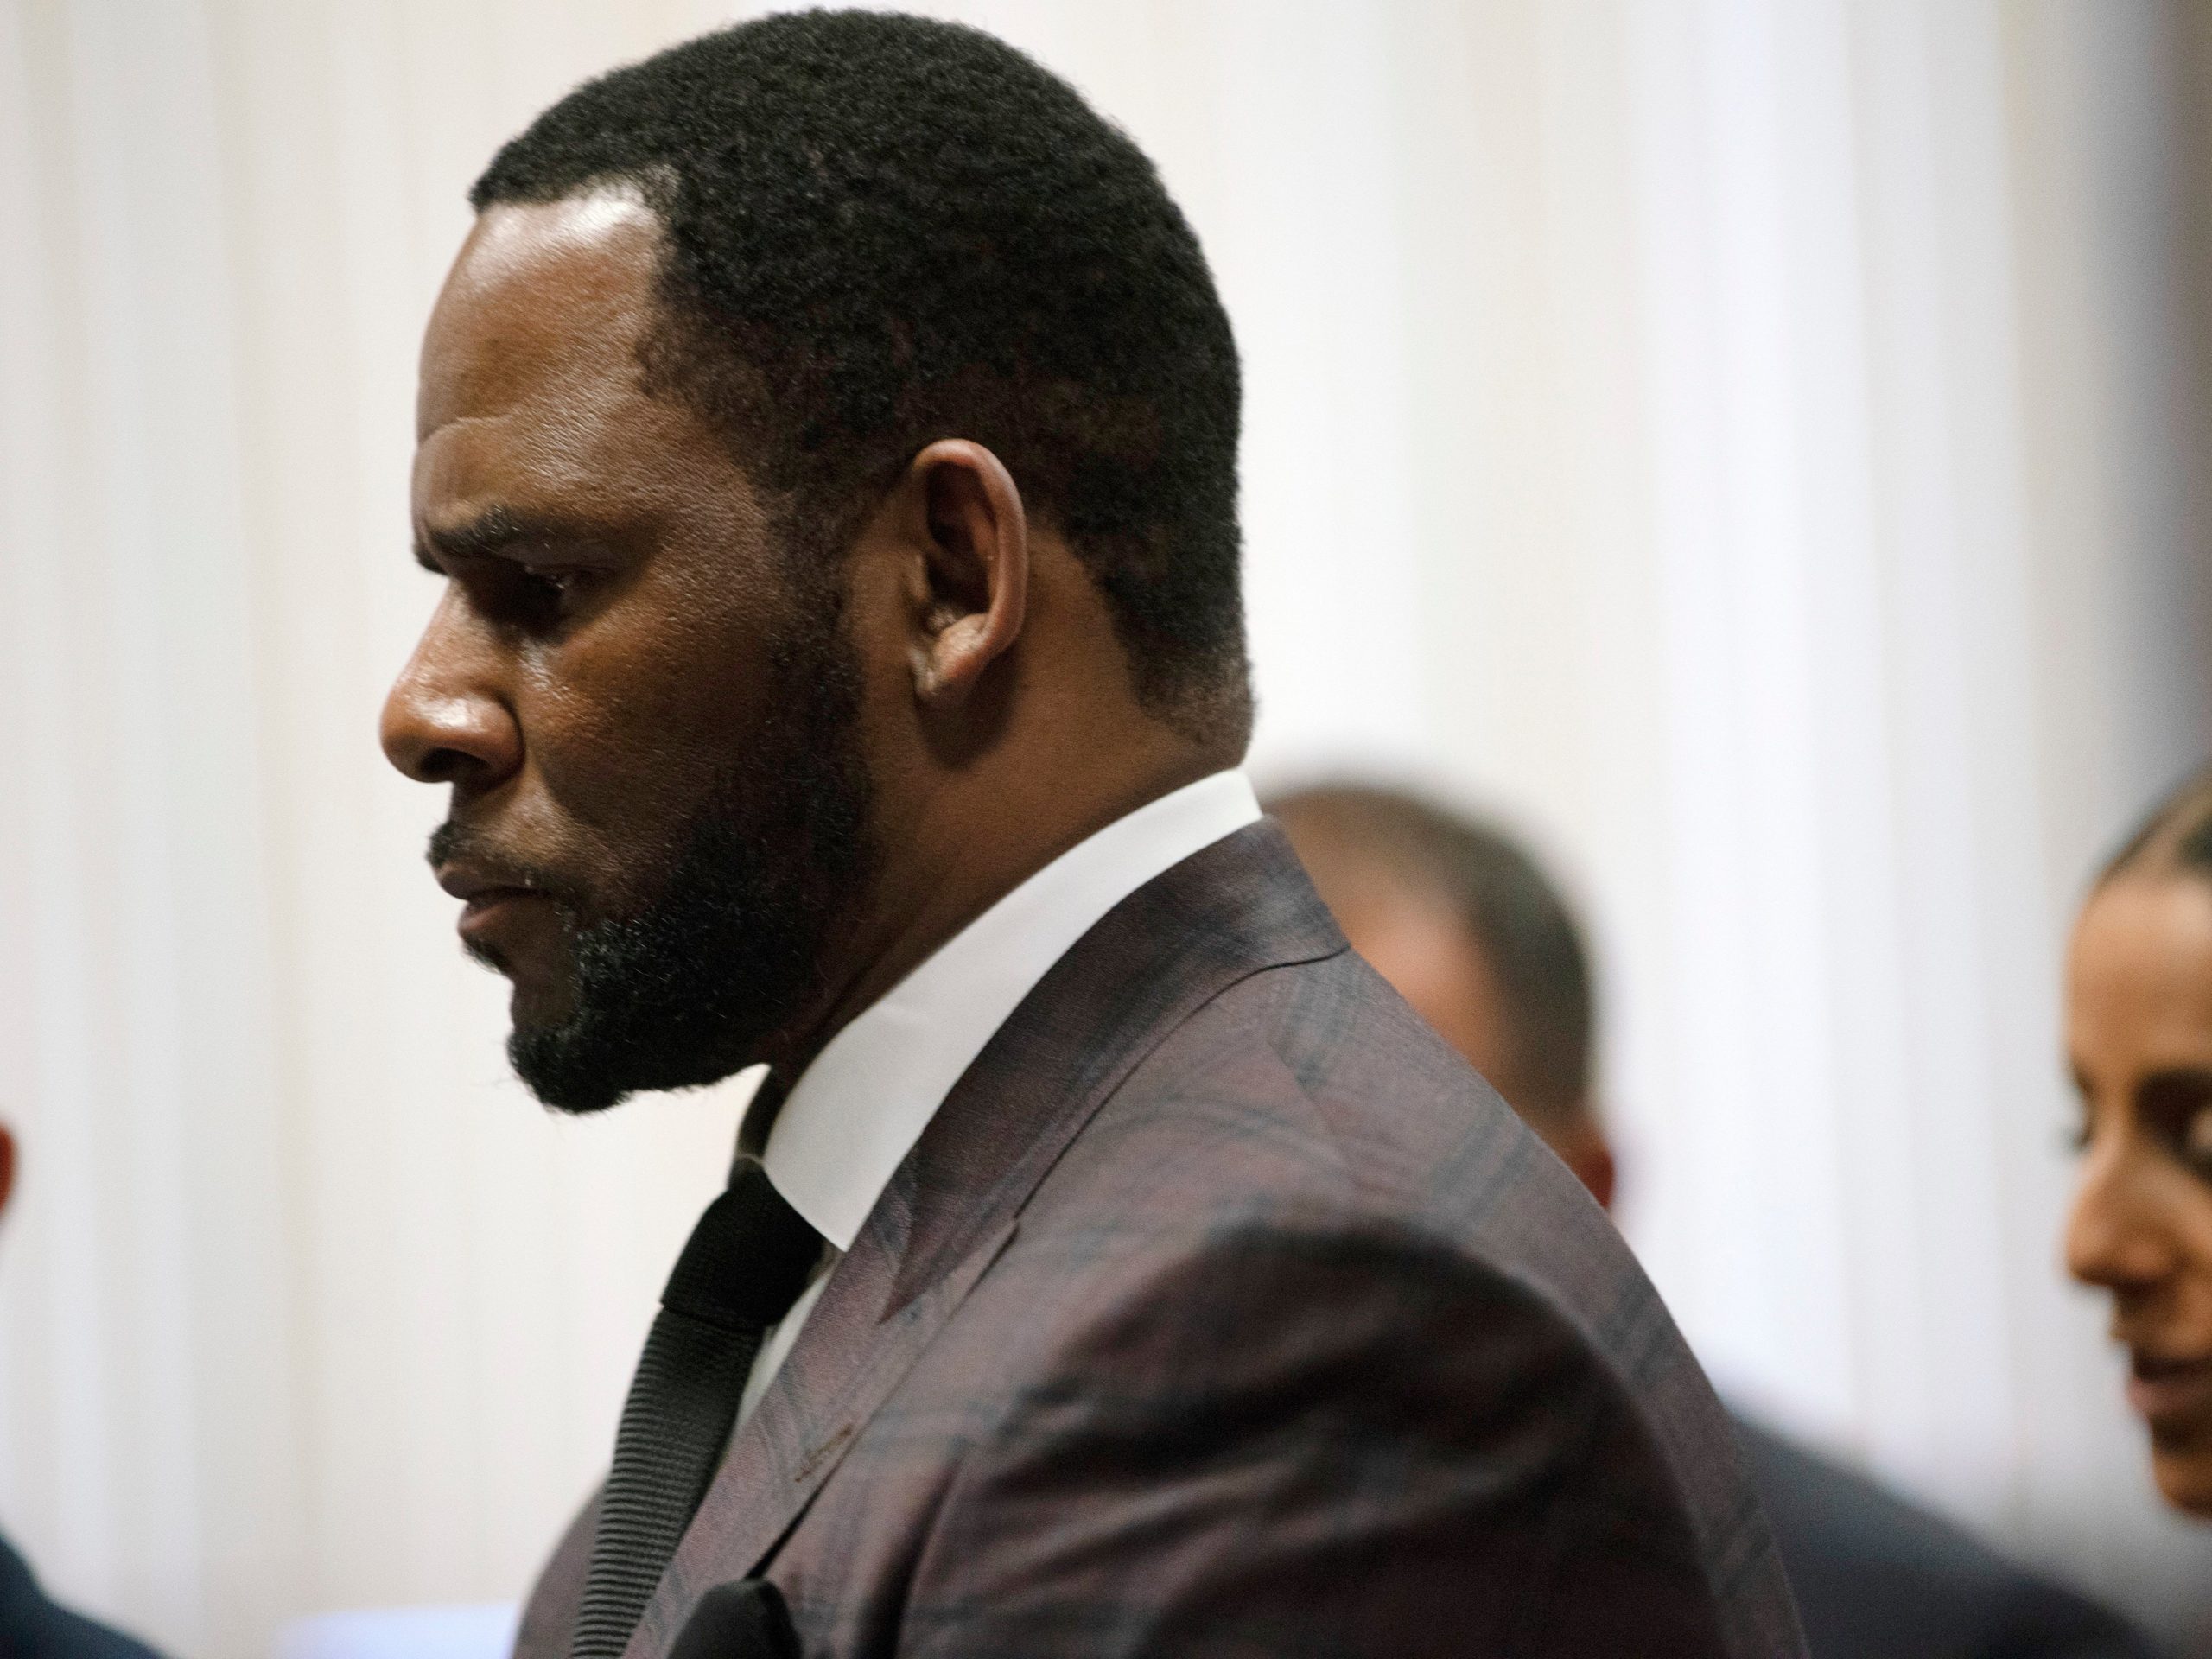 R Kelly convicted of racketeering and sex-trafficking charges after graphic trial